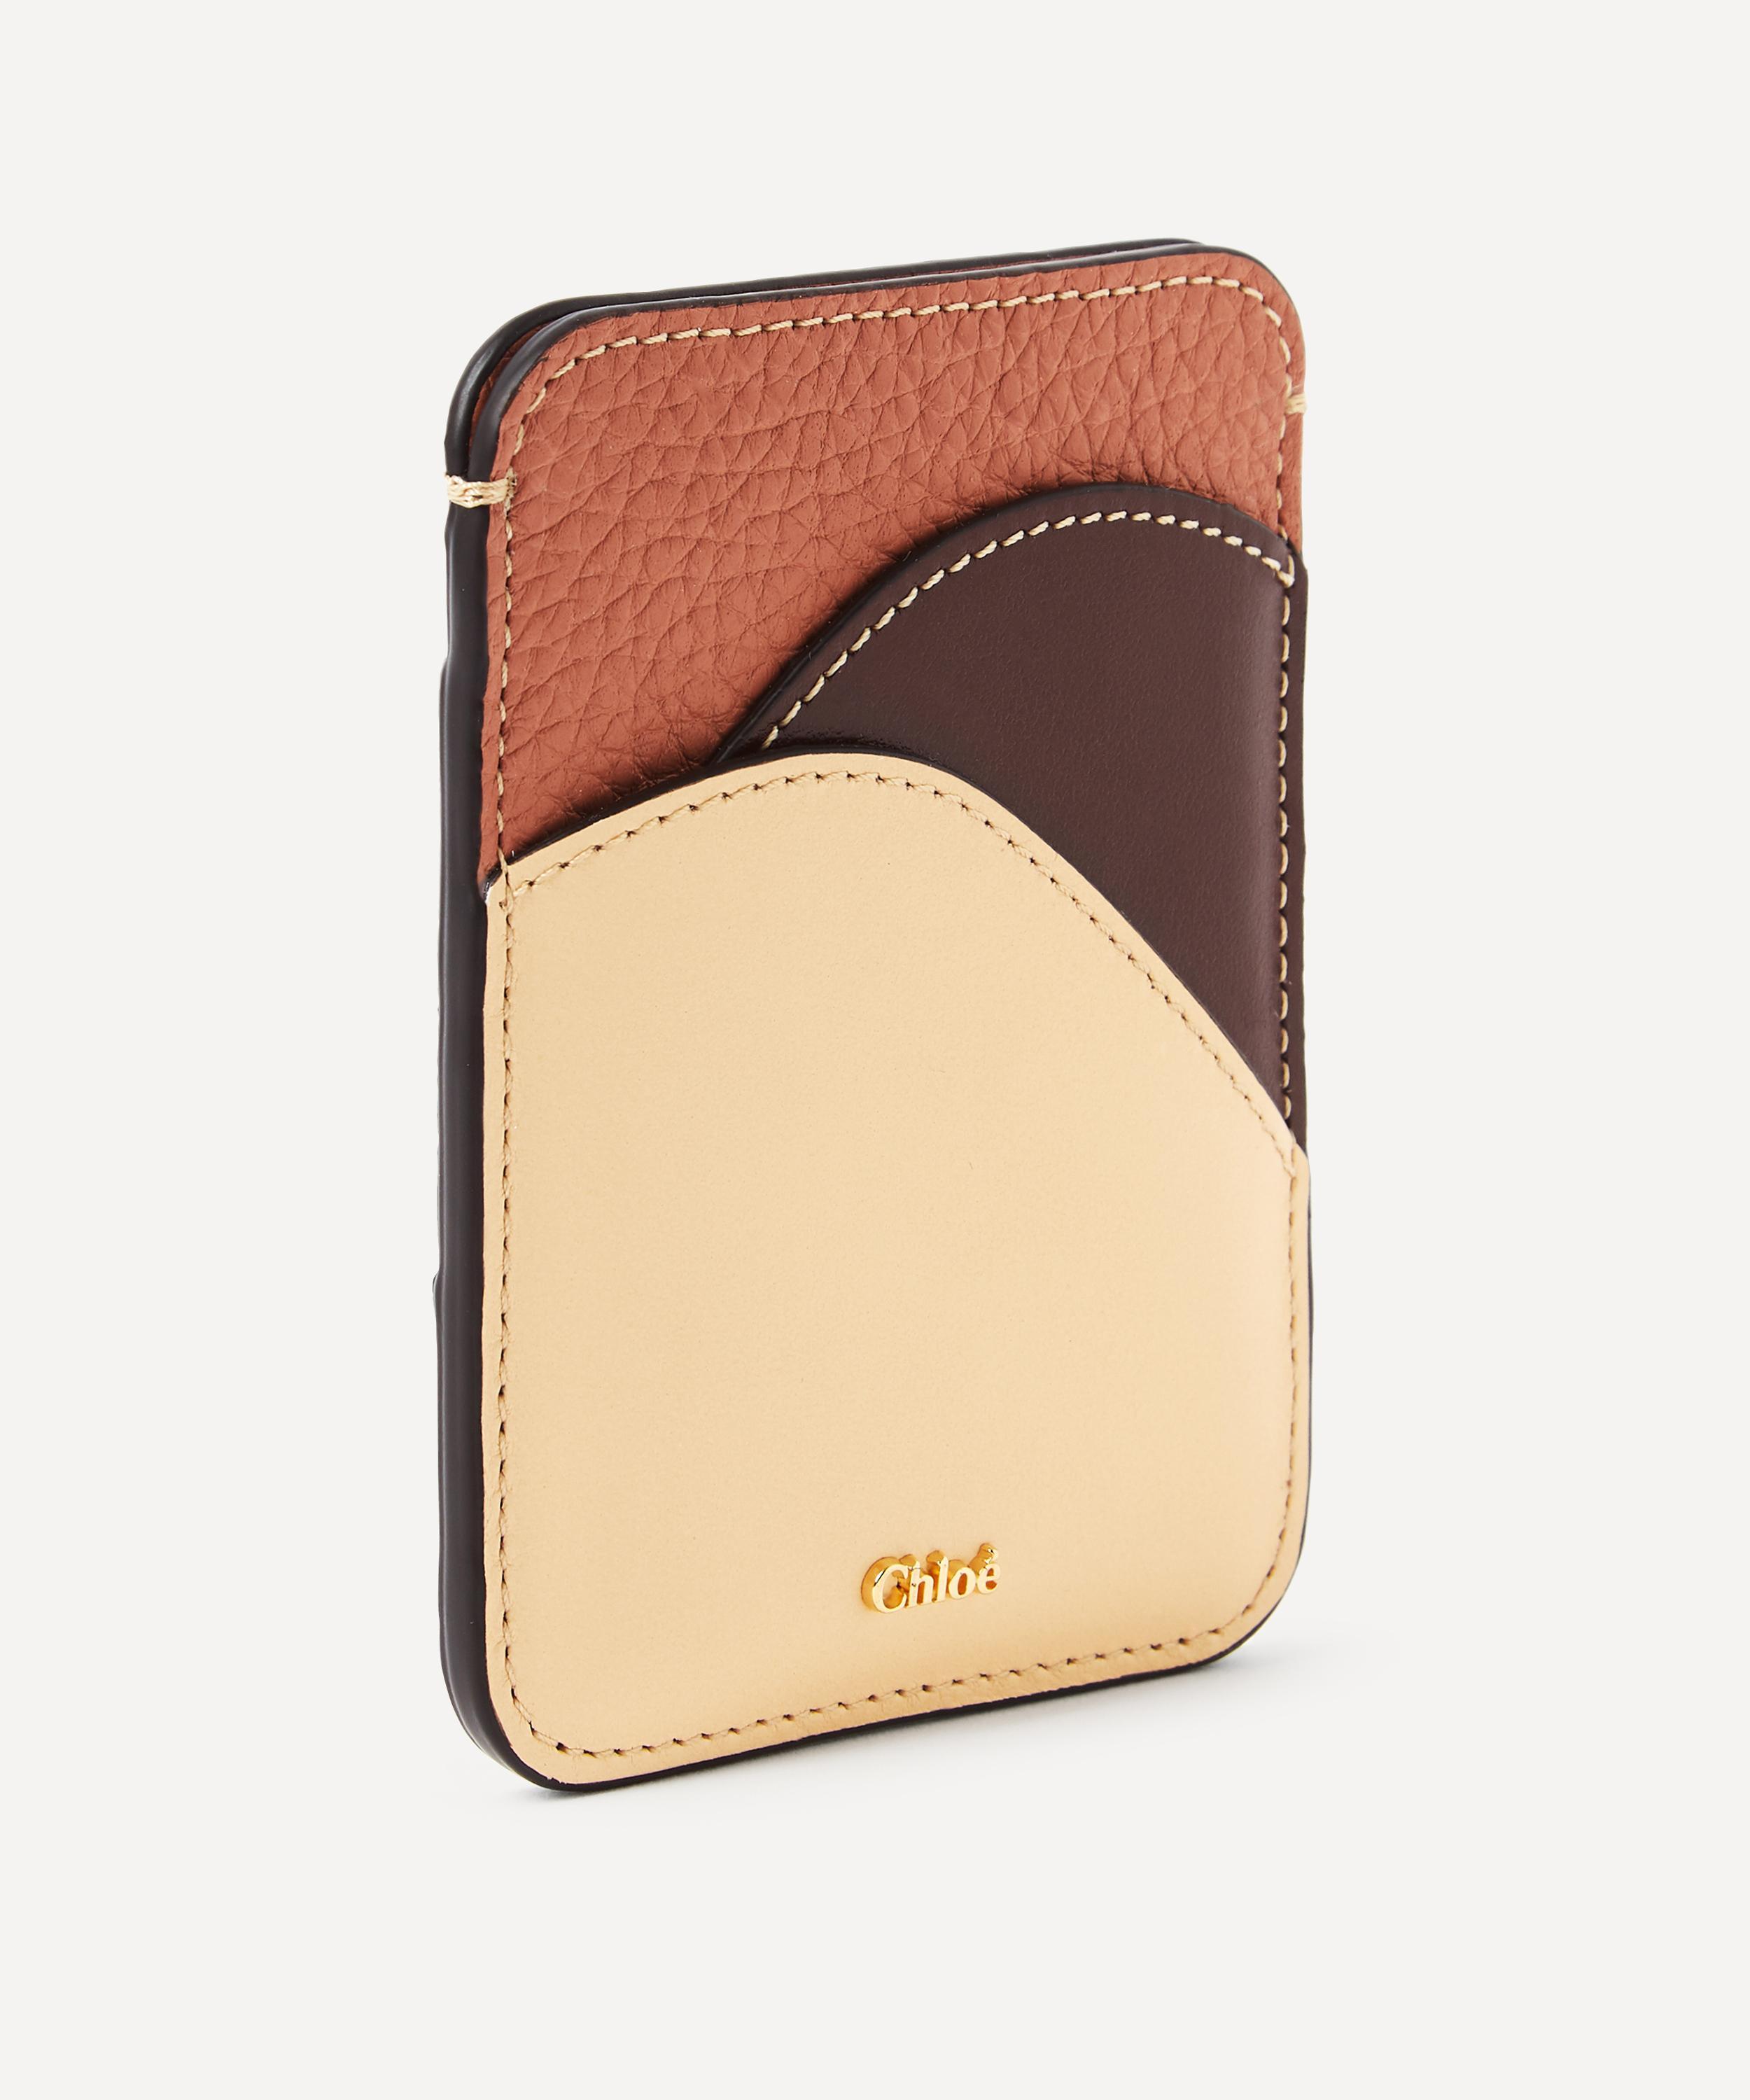 Chloé Walden Leather Card Holder in Natural - Lyst